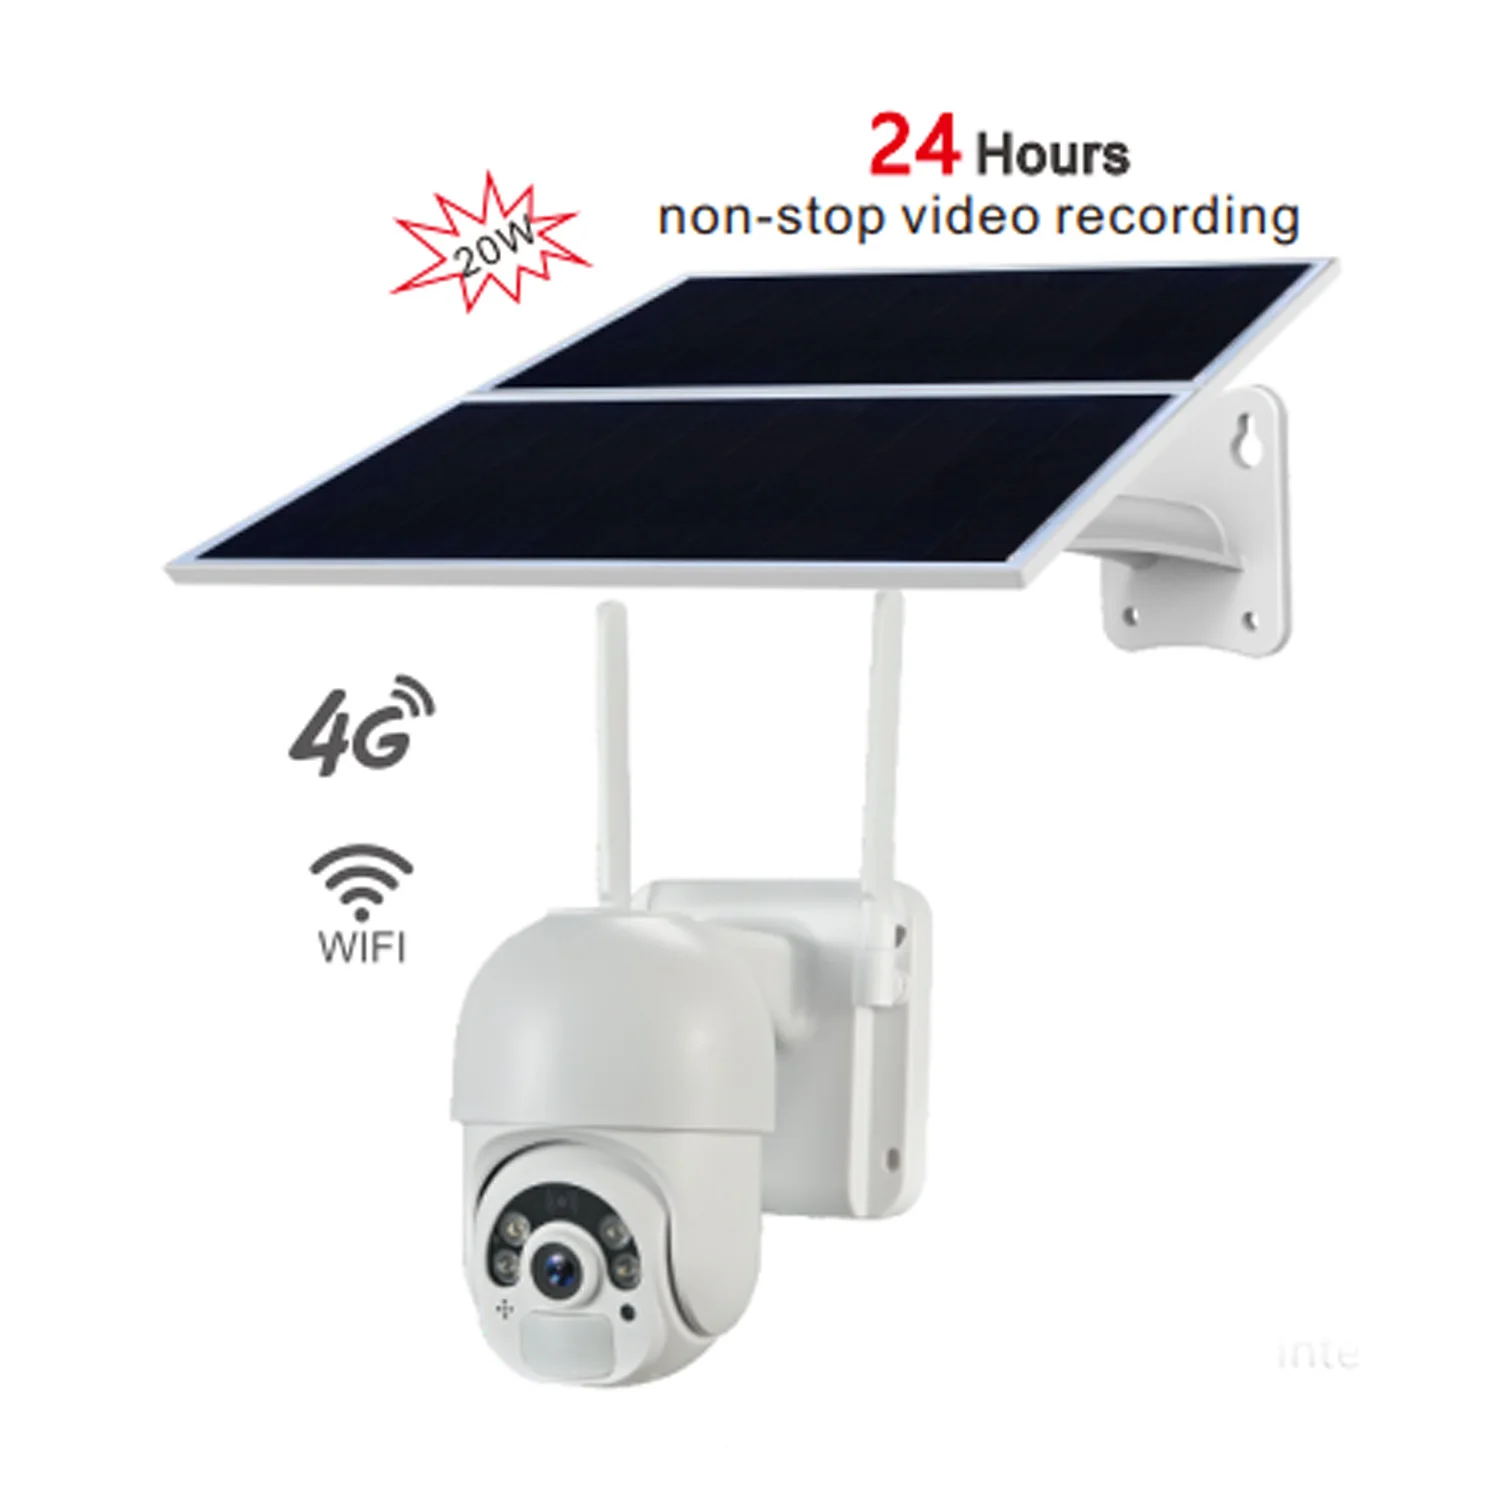 

4G PTZ Wireless Outdoor Battery Powered Security 20W Solar Panel CCTV Camera 24 hours non-stop recording Two- way audio